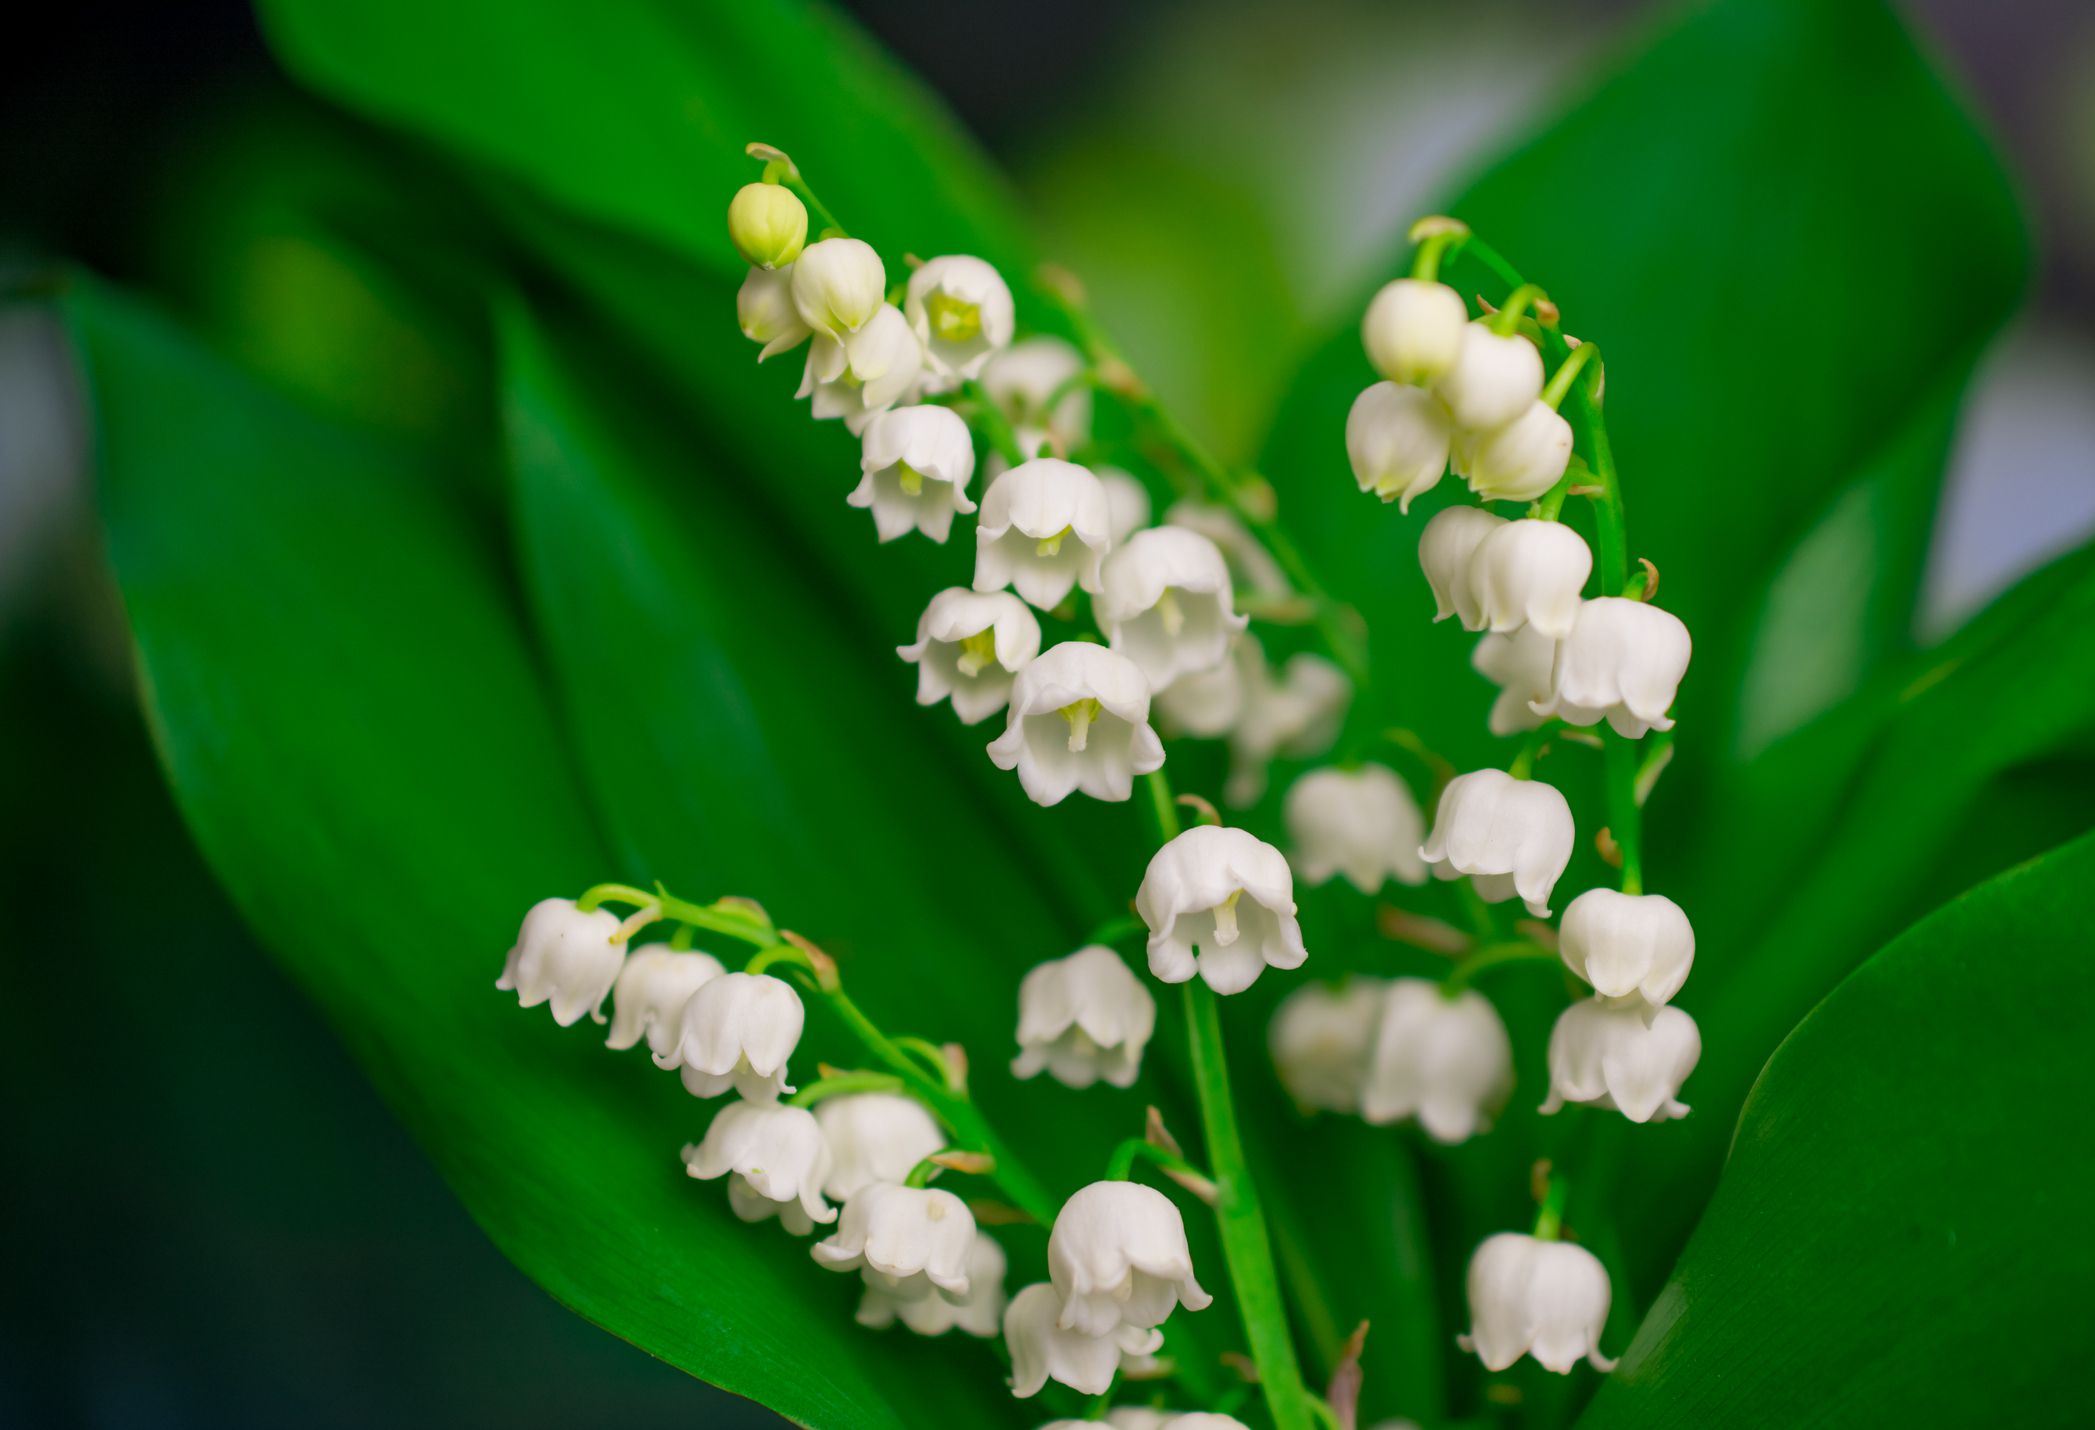 <p>Lily of the Valley, or Convallaria majalis, contains cardiac glycosides that can cause acute kidney failure when ingested by cats and dogs. The main symptoms include vomiting, diarrhea, and a drop or increase in heart rate. Seek immediate veterinary attention if your pet ingests this plant; it is highly dangerous.</p>